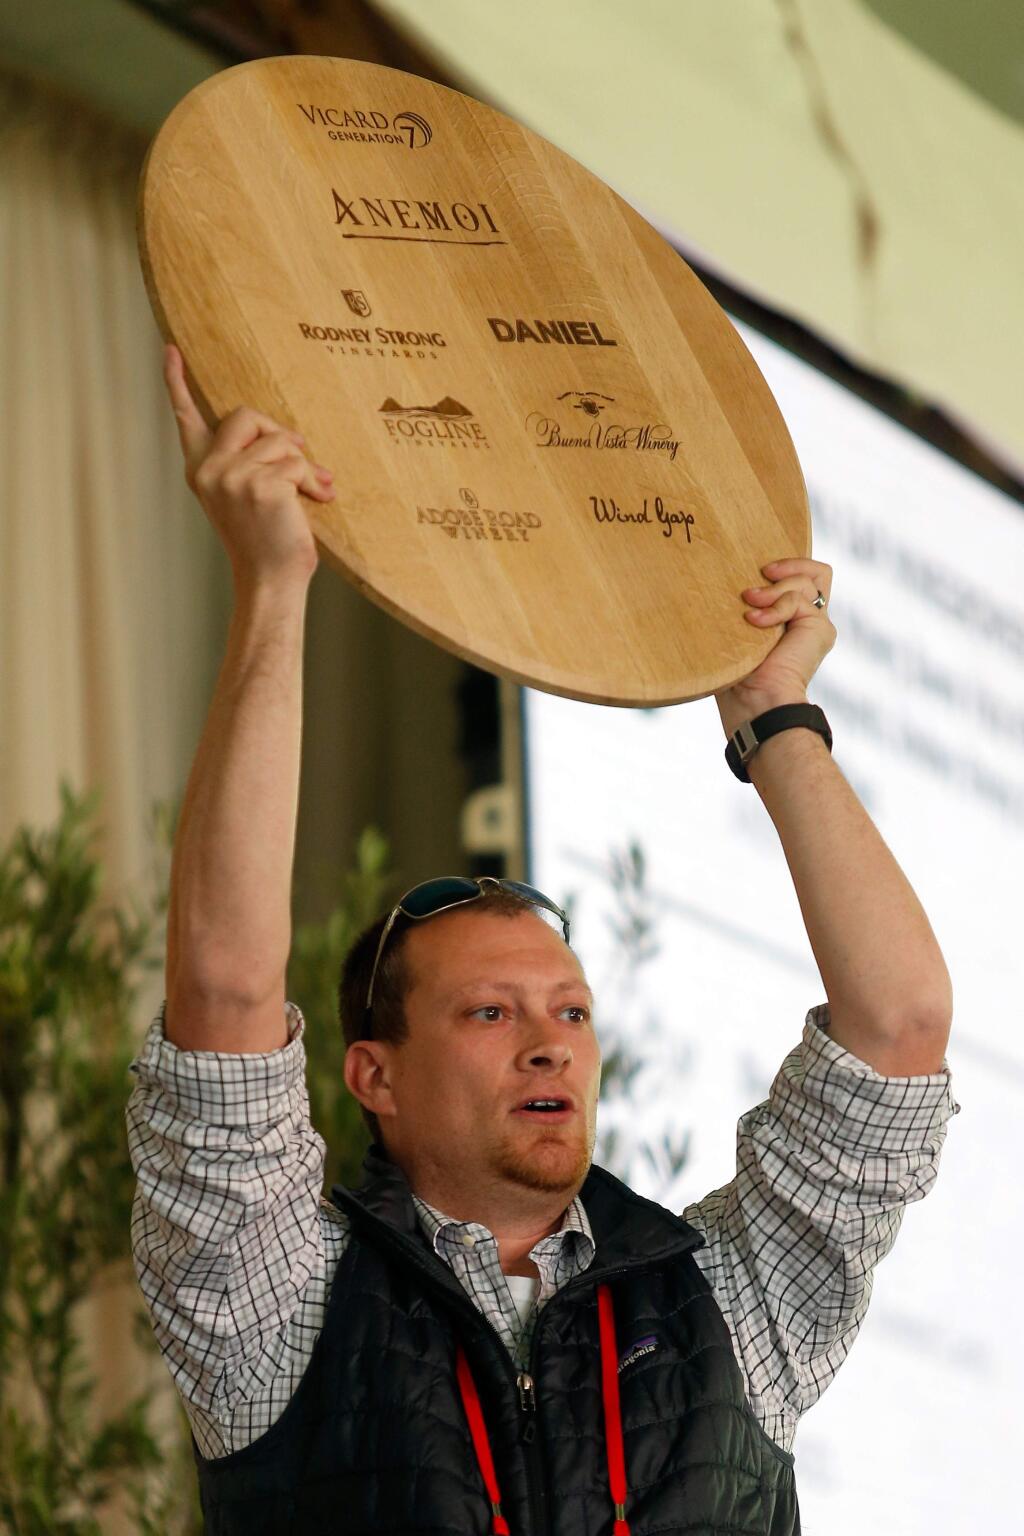 Winemaker Justin Seidenfeld of Rodney Strong Vineyards holds up a sign featuring the wineries of the recently christened Petaluma Gap AVA during bidding at the Sonoma County Barrel Auction at MacMurray Ranch, in Healdsburg, California, on Friday, April 20, 2018. (Alvin Jornada / The Press Democrat)